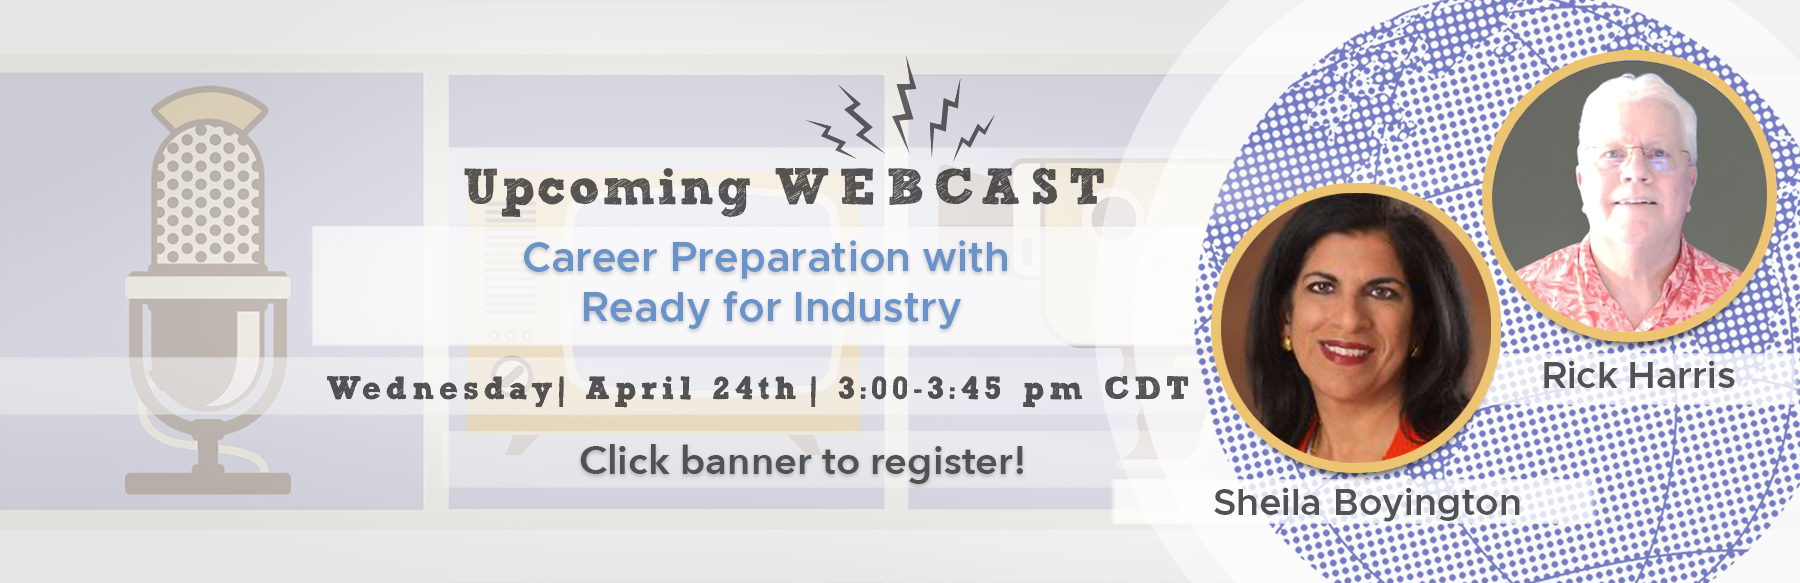 Career Preparation with Ready for Industry Webcast banner